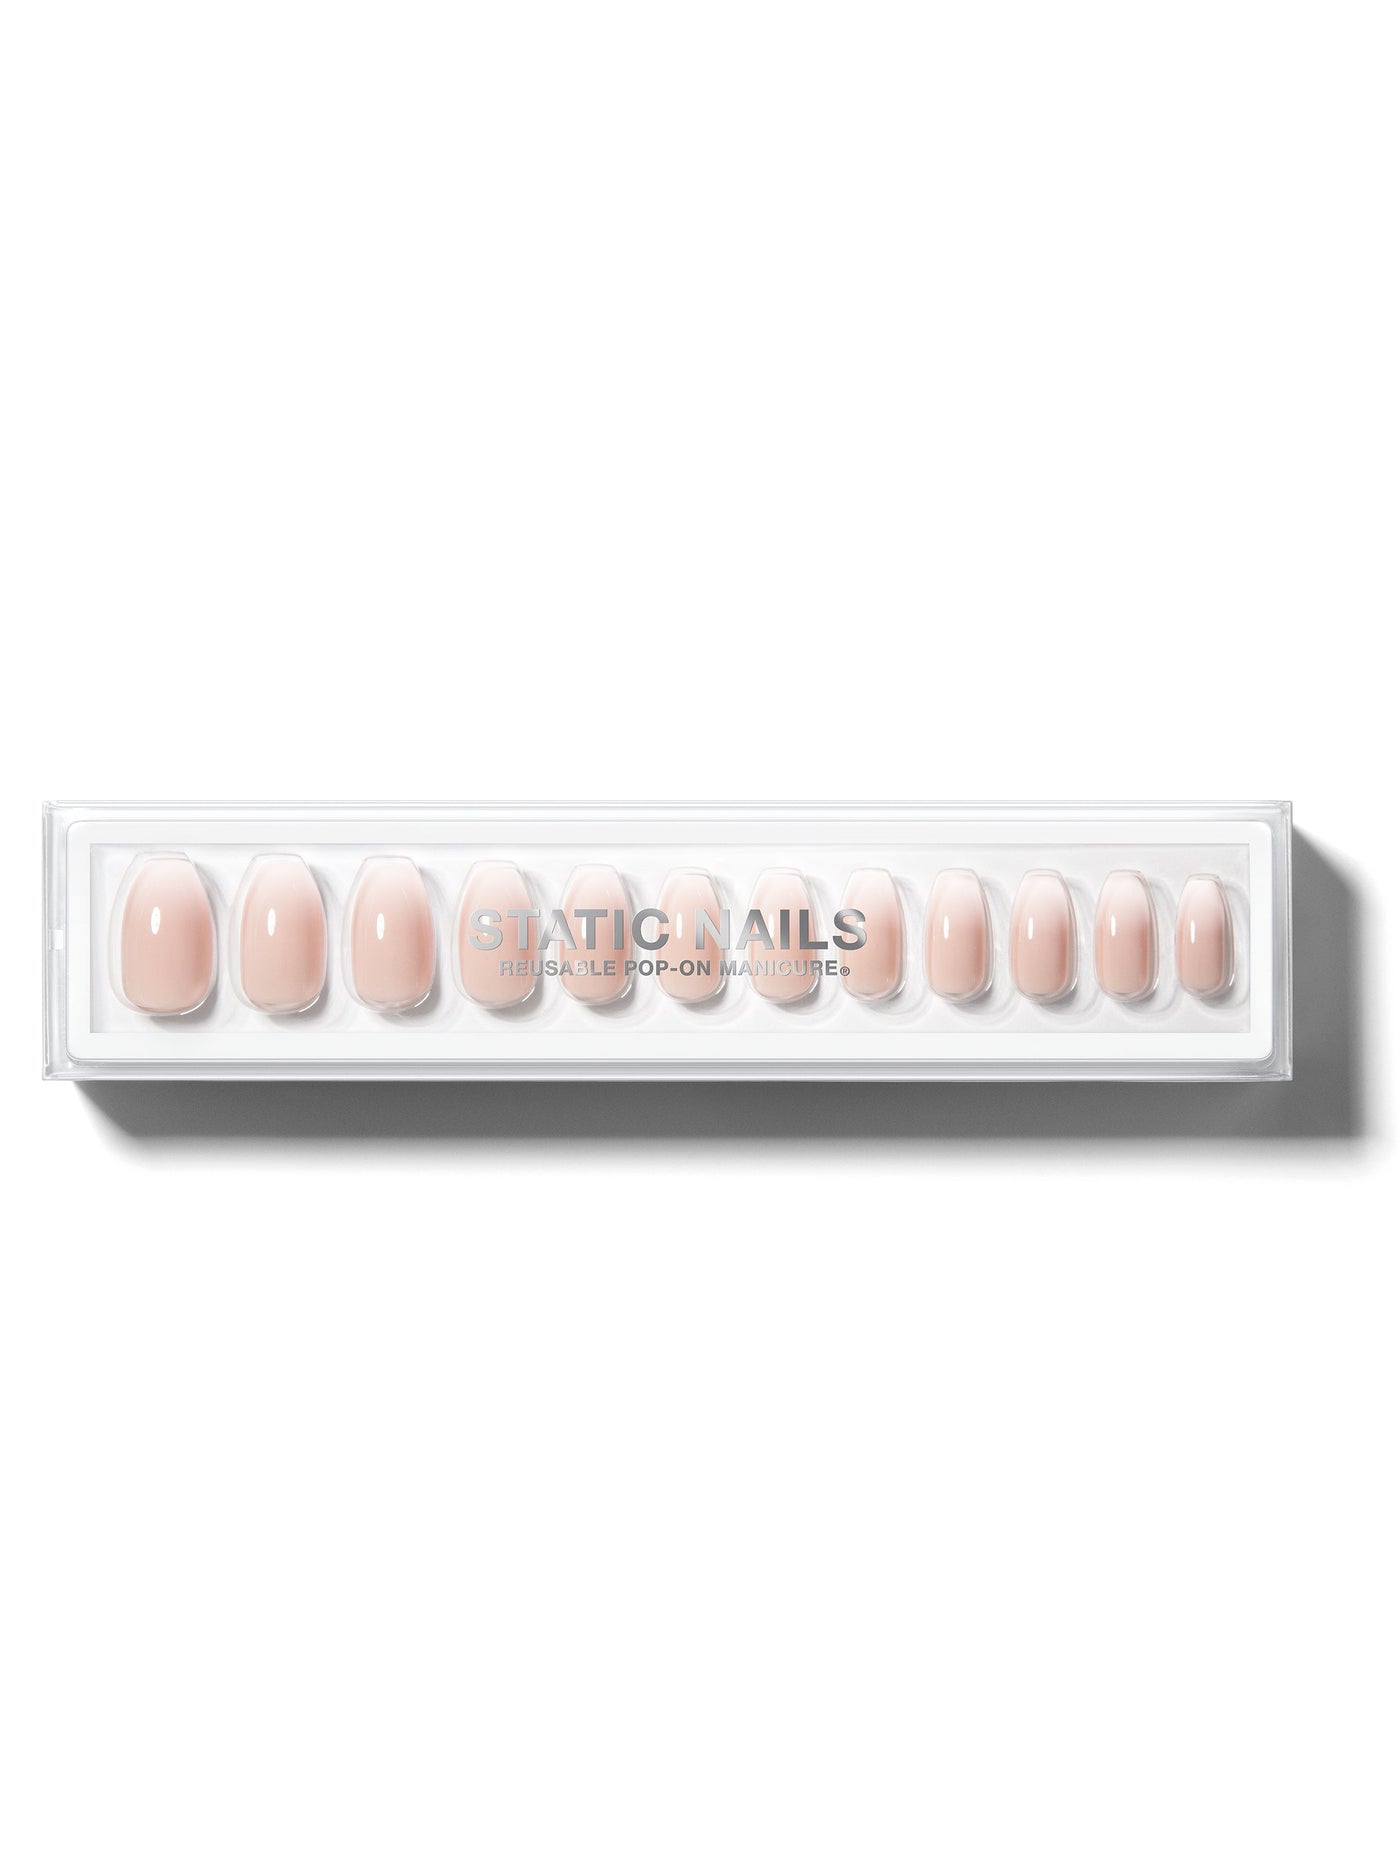 Ombre light pink to white manicure in coffin shape,